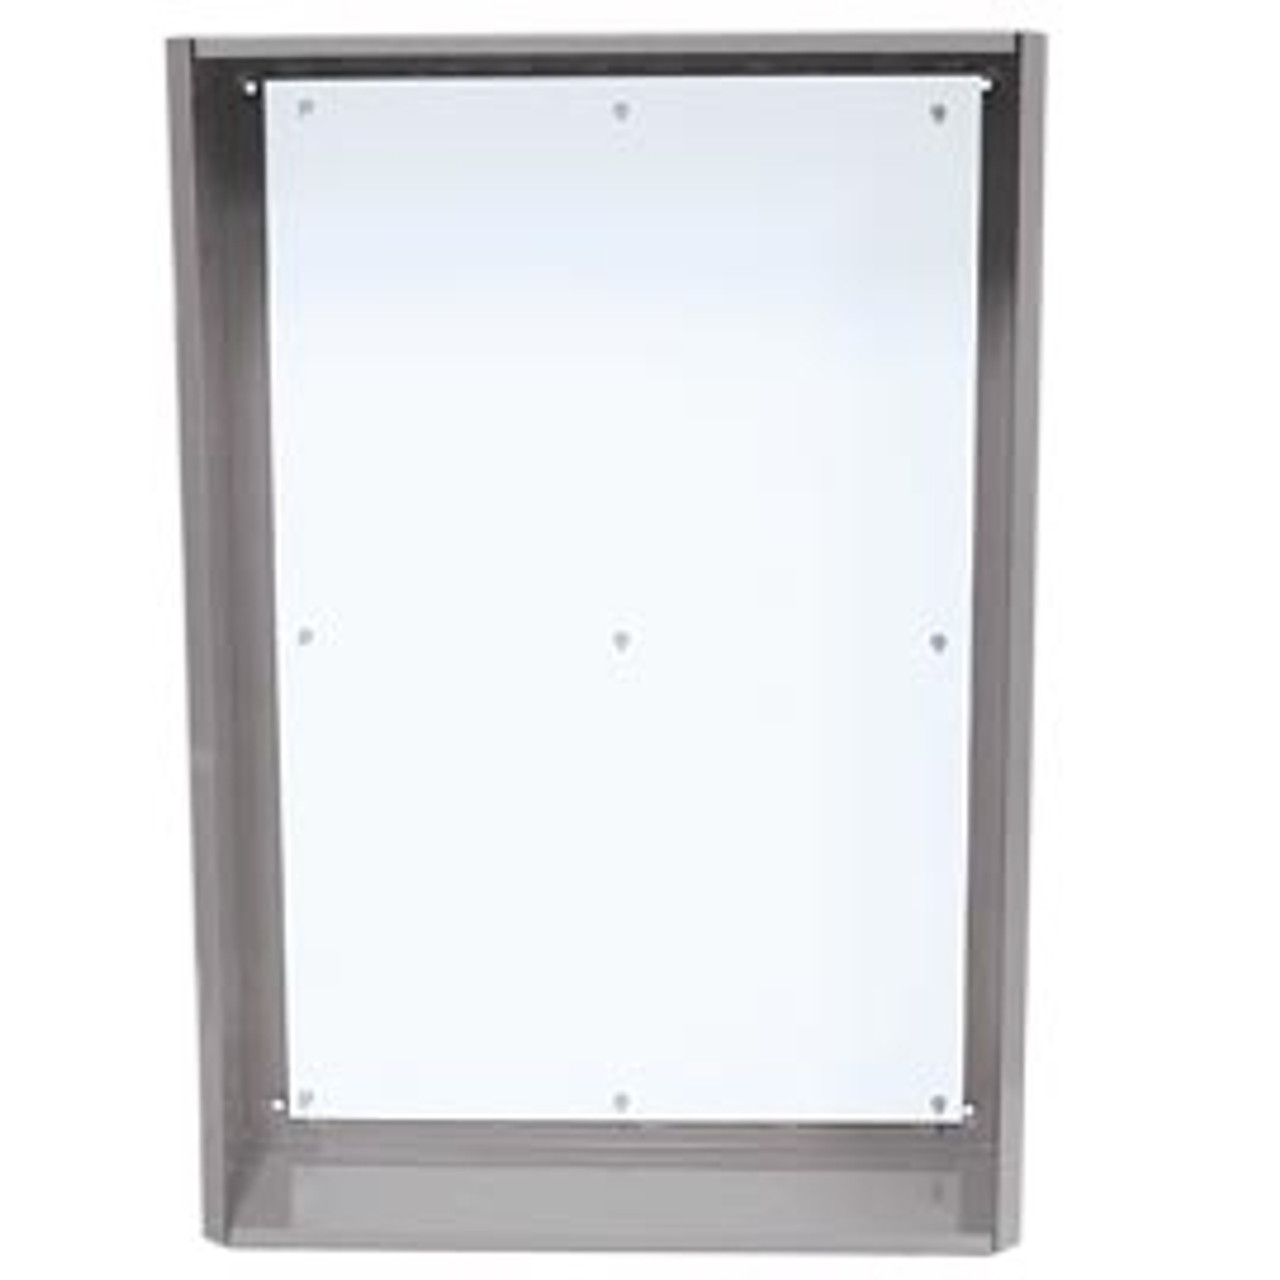 FUNCTIONAL DEVICES FUNSP5803L MH5800 Subpanel Polymetal 34.125H x 22.500W x .130T